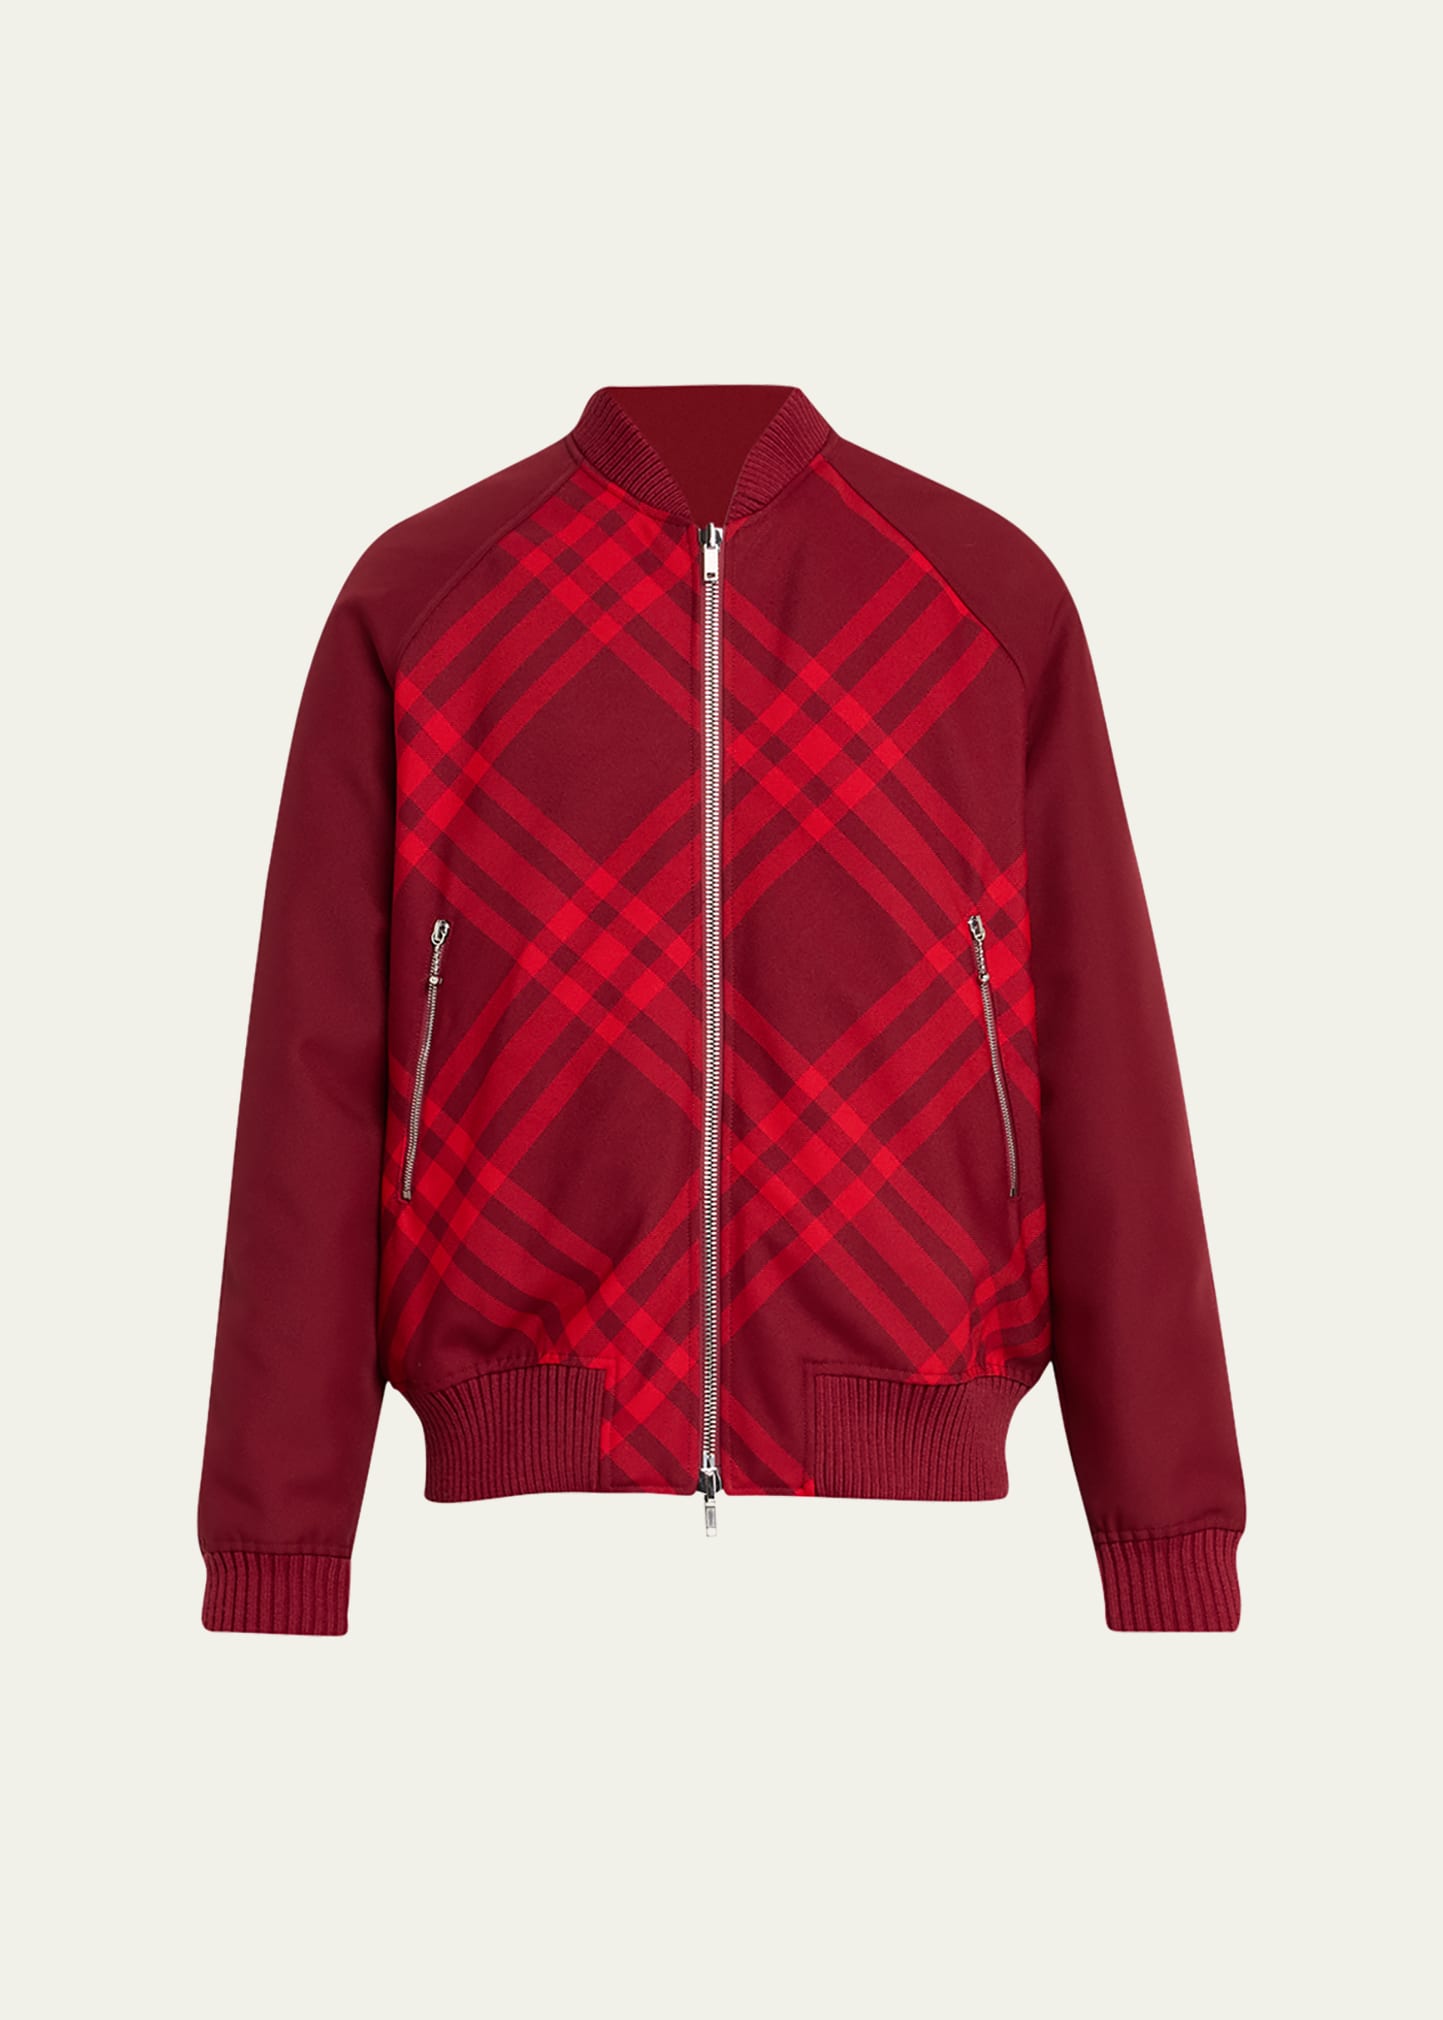 Shop Burberry Men's Reversible Check Bomber Jacket In Ripple Ip Check